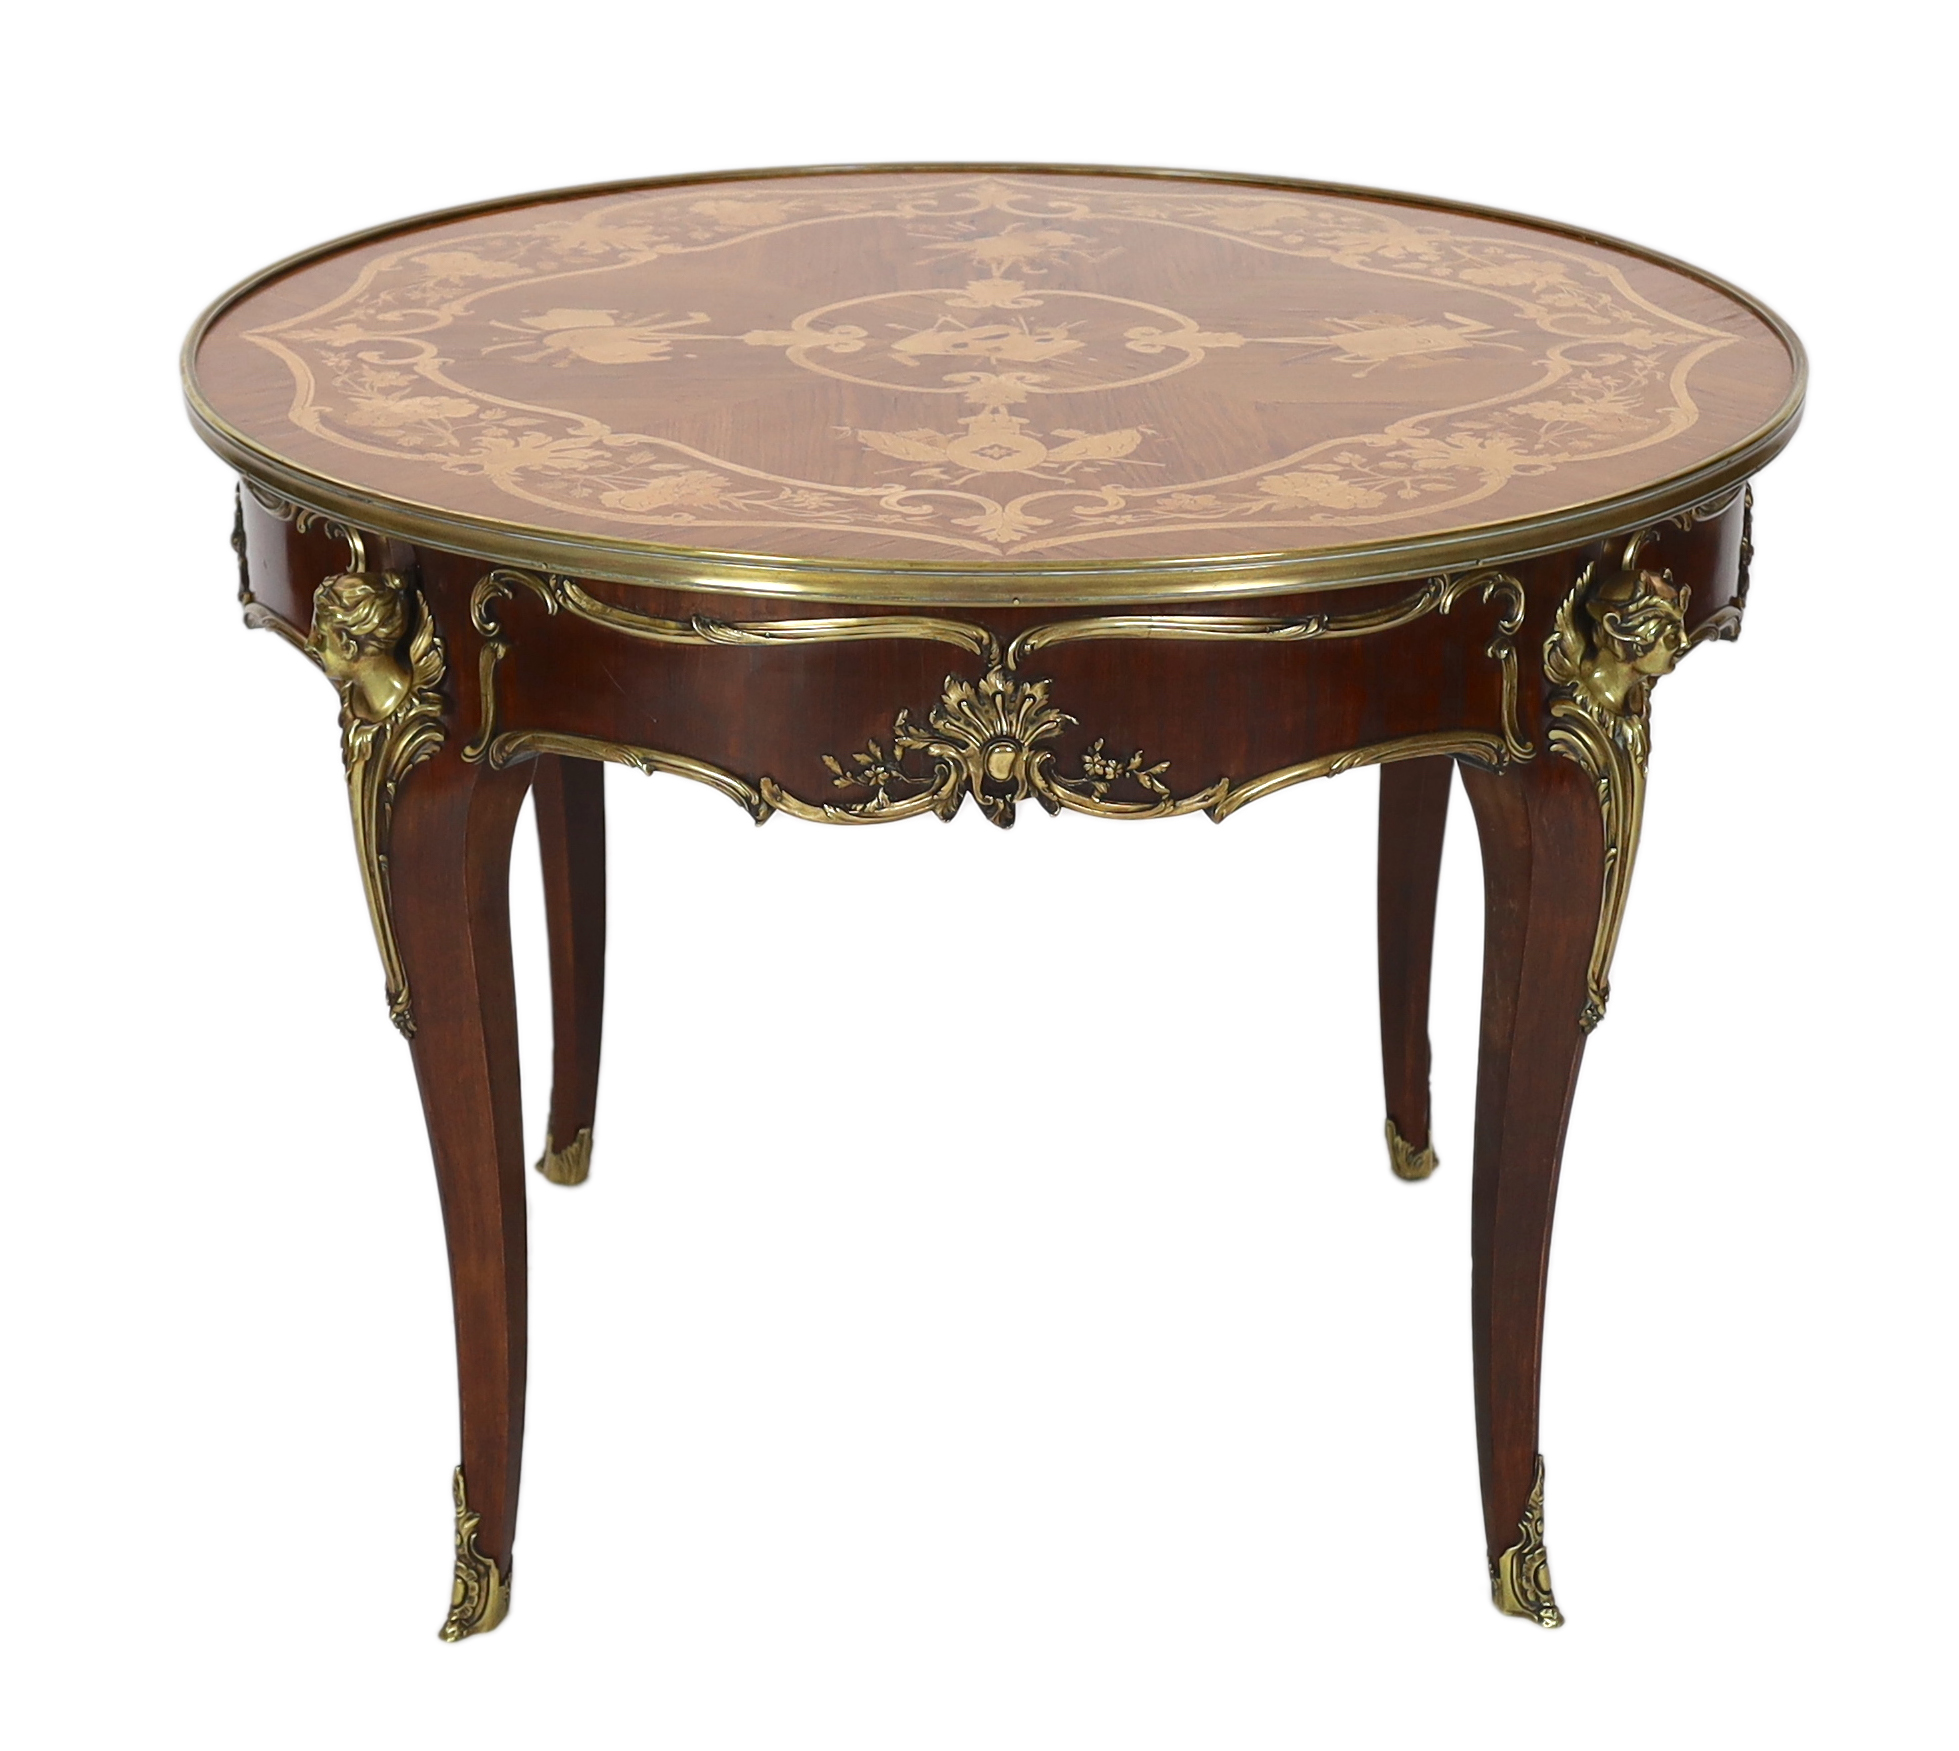 A Louis XVI style ormolu mounted marquetry centre table, decorated with musical, agricultural and arts related trophies within a band of flowers, the circular top over a scroll mounted frieze with classical mask headed c